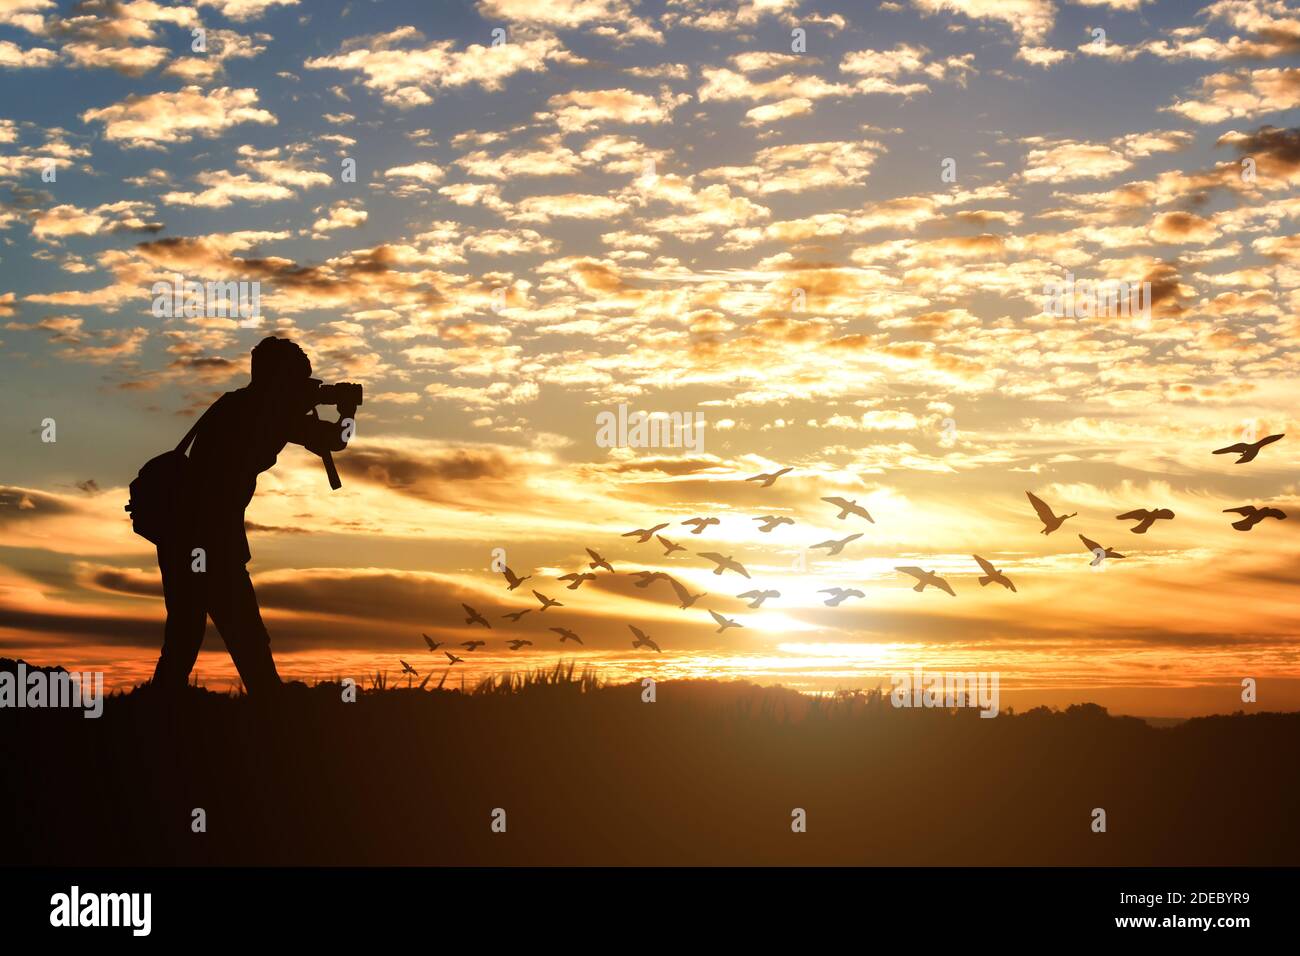 Silhouette of male photographer taking picture against sunset with a flock of birds flying. Stock Photo